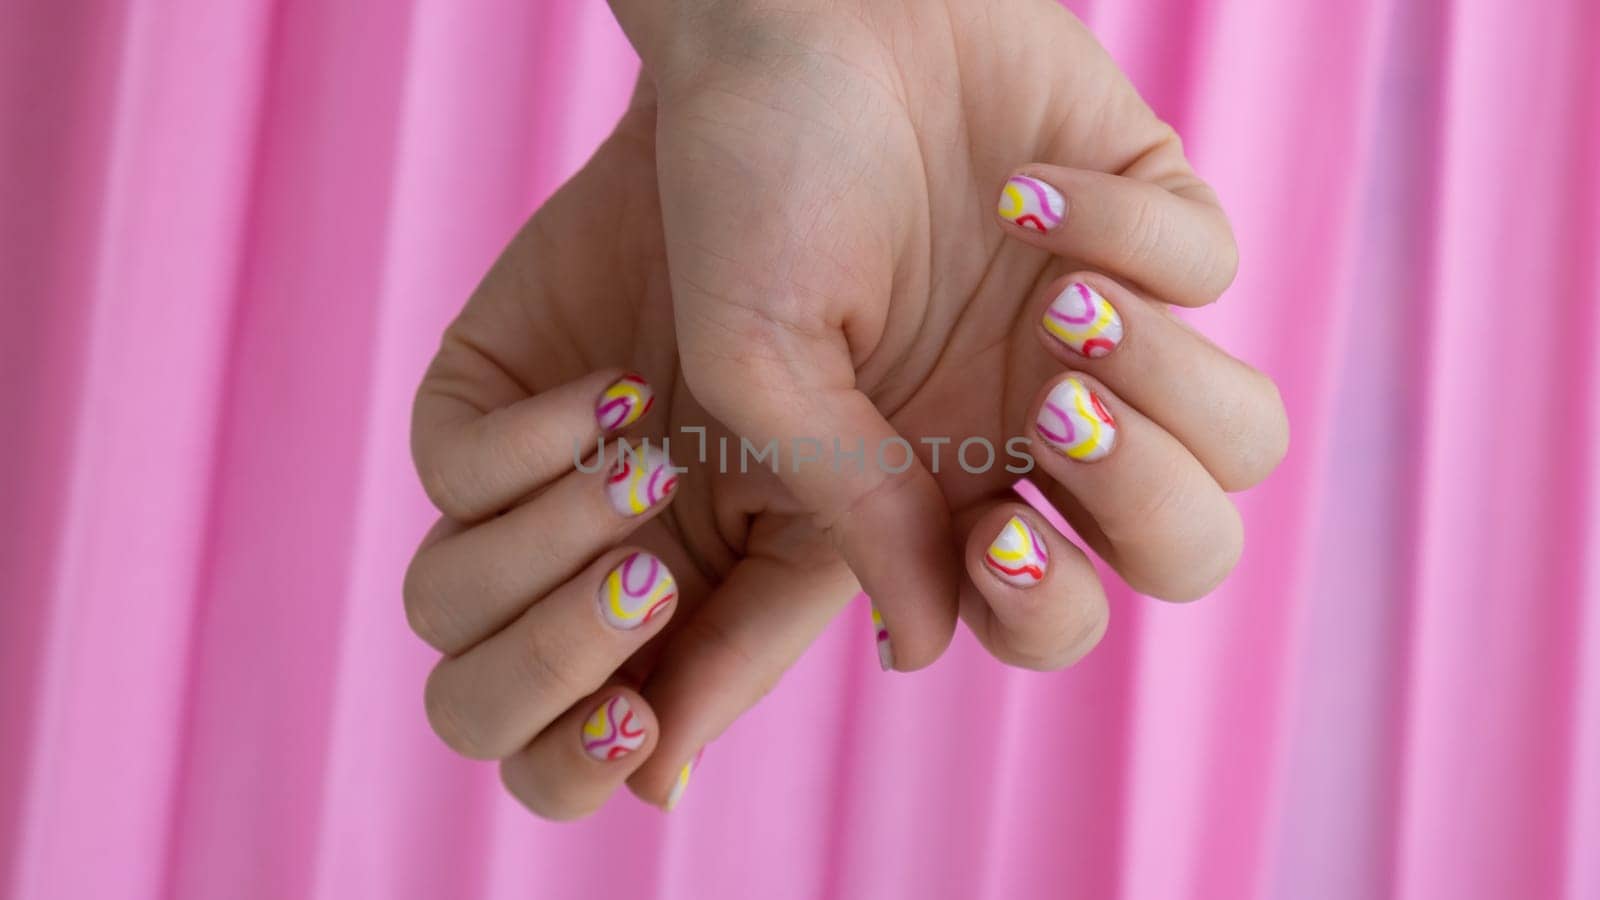 Woman manicured hands, stylish summer colorful nails on pink background. Closeup of manicured nails of female hand. Summer style of nail design concept. Beauty treatment.